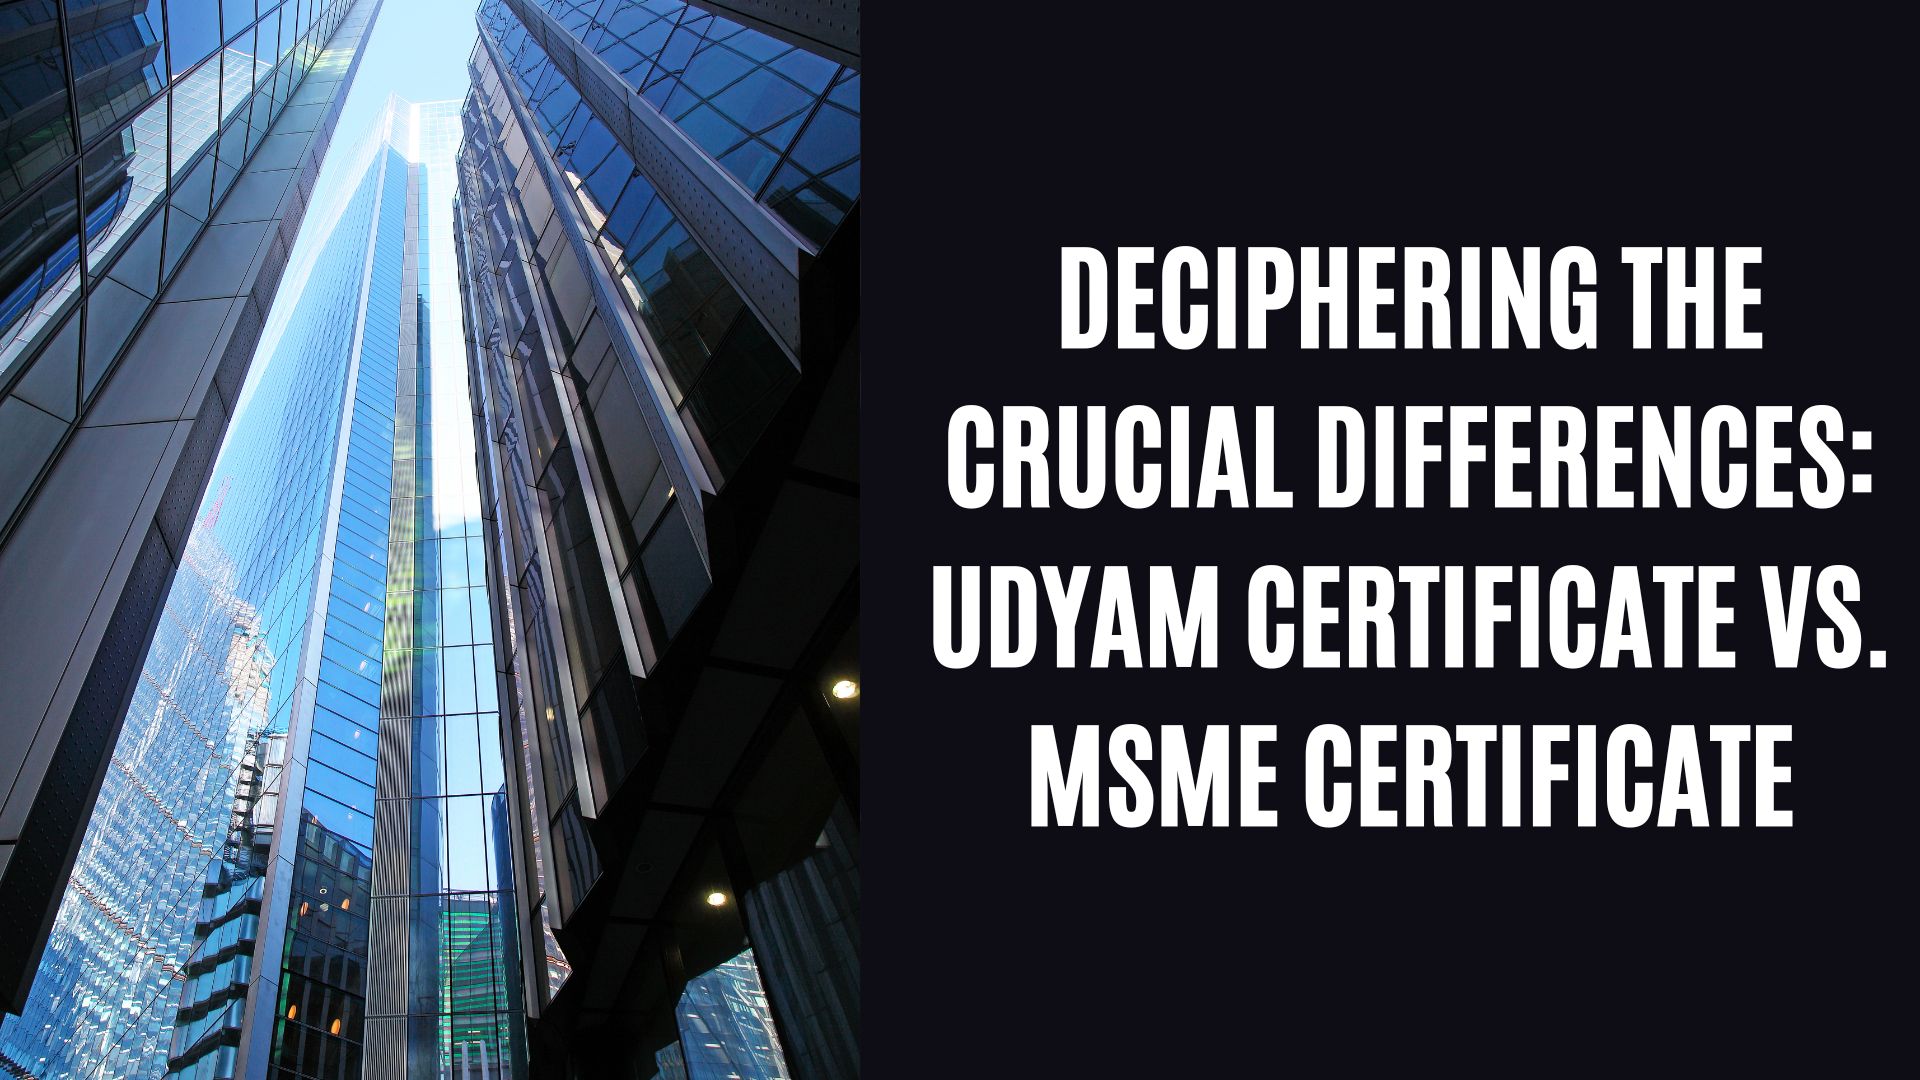 Deciphering the Crucial Differences: Udyam Certificate vs. MSME Certificate